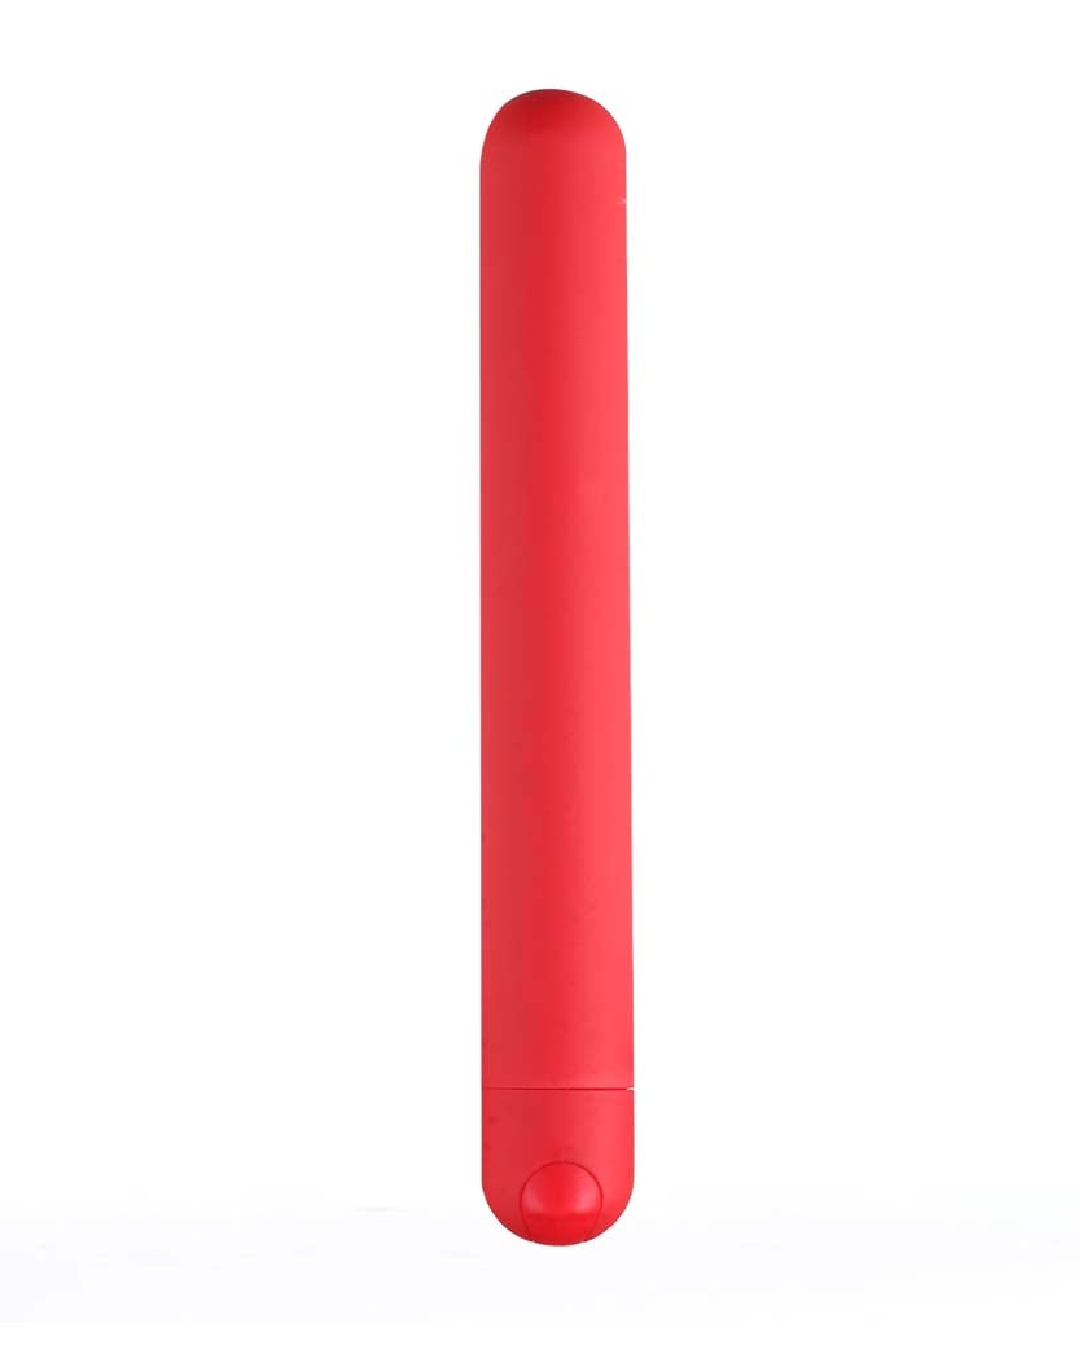 Abbie X-Long Super Charged Red Bullet Vibrator on white background